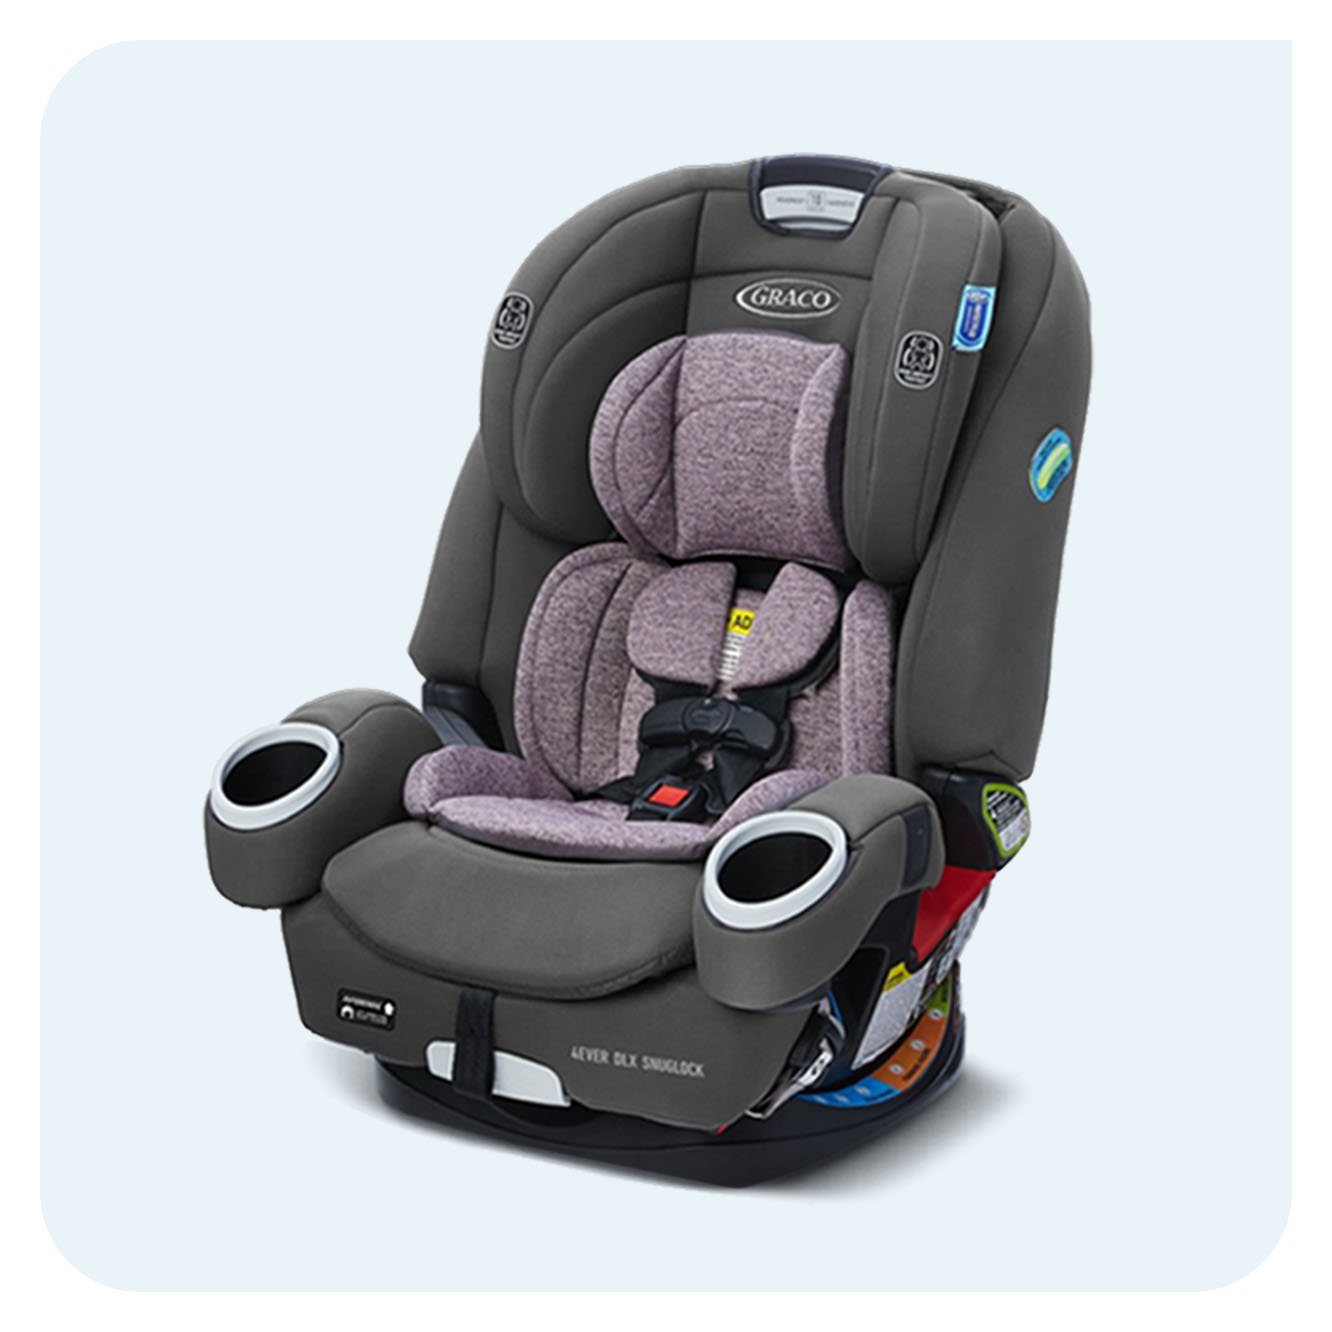 https://newellbrands.scene7.com/is/image/NewellRubbermaid/Graco_2023_Homepage_Category_Carseat_Carousel_Tile?fmt=jpeg